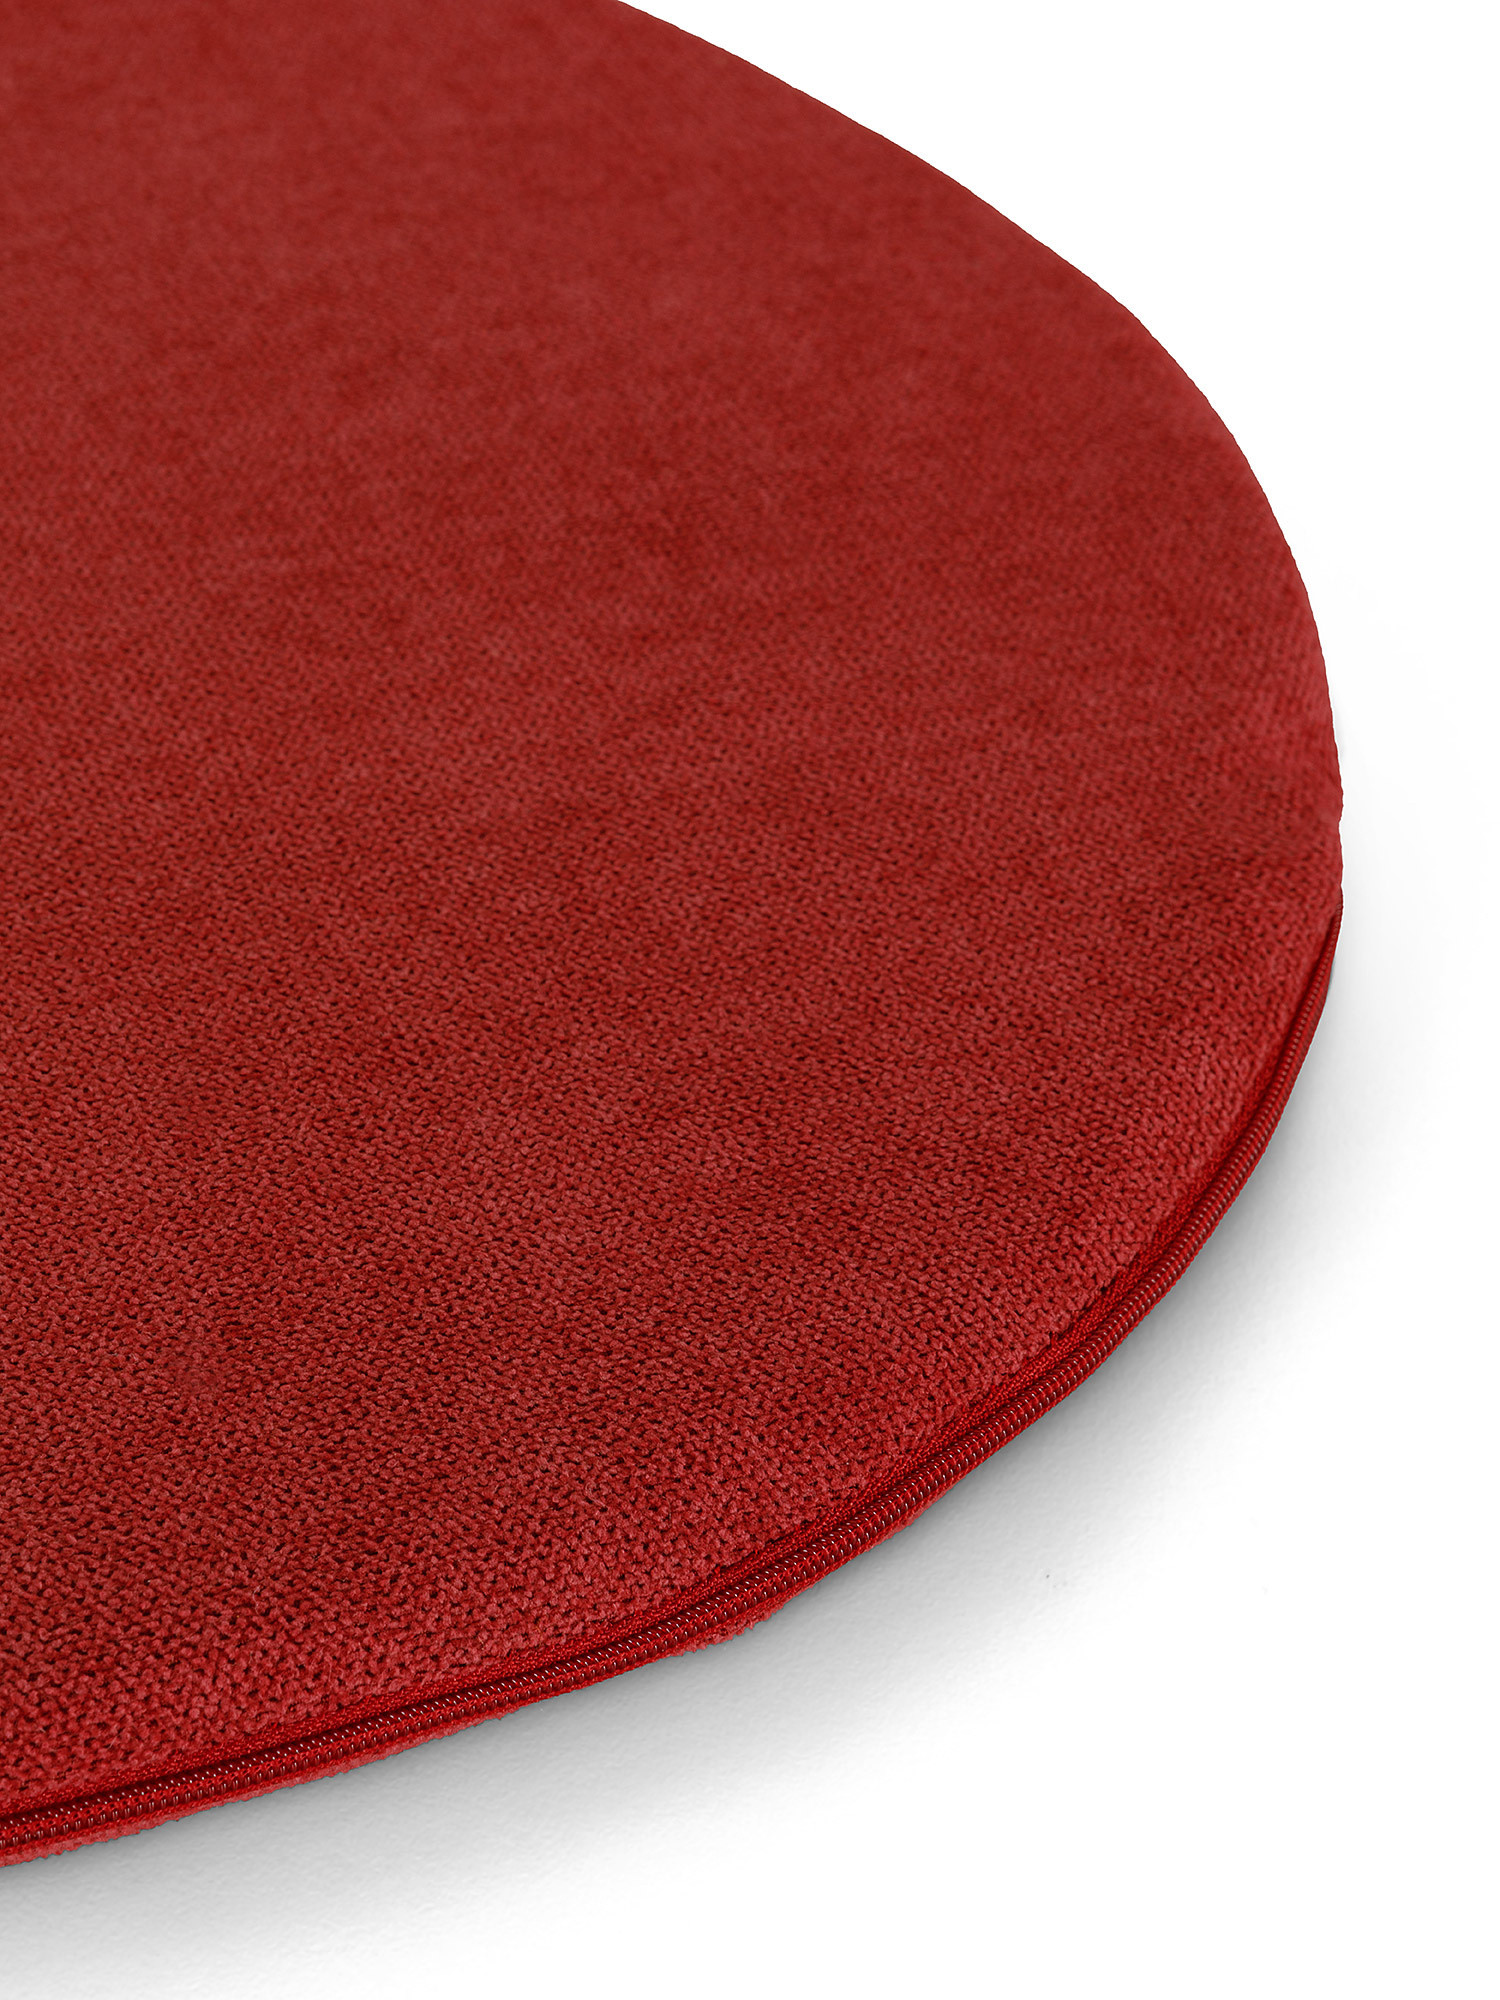 Solid color cotton chair cushion, Red, large image number 1